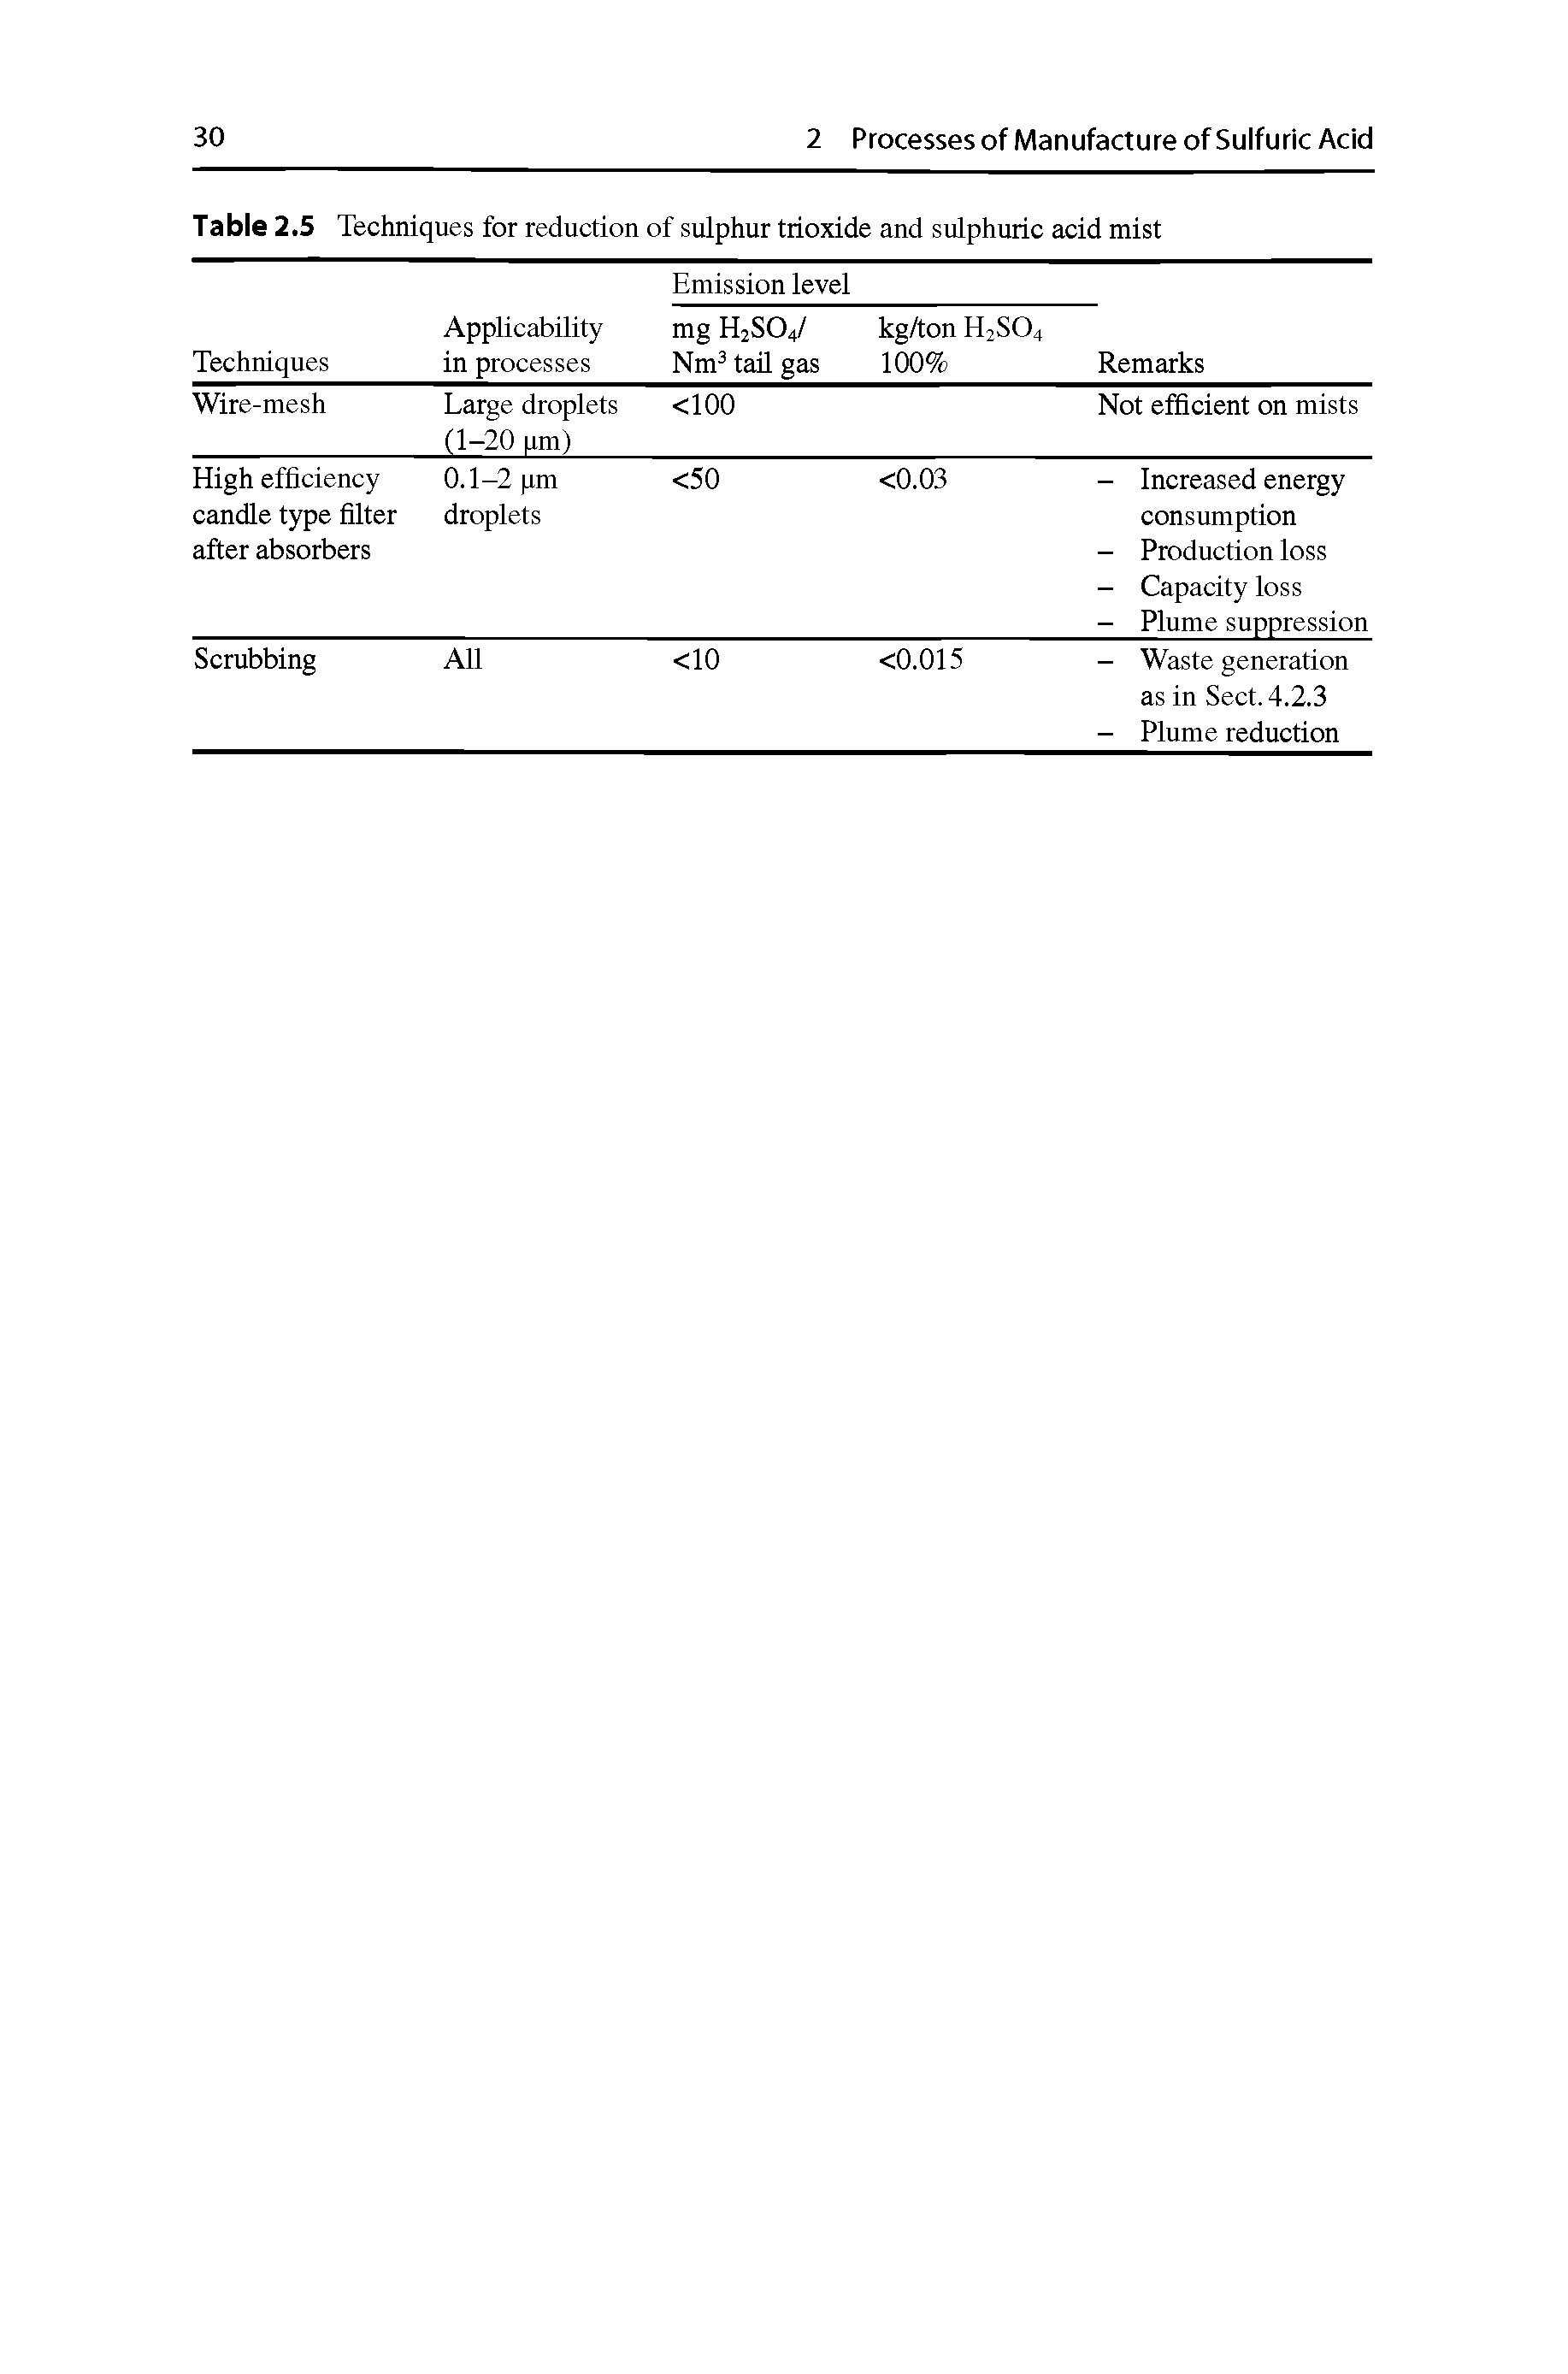 Table 2.5 Techniques for reduction of sulphur trioxide and sulphuric acid mist ...